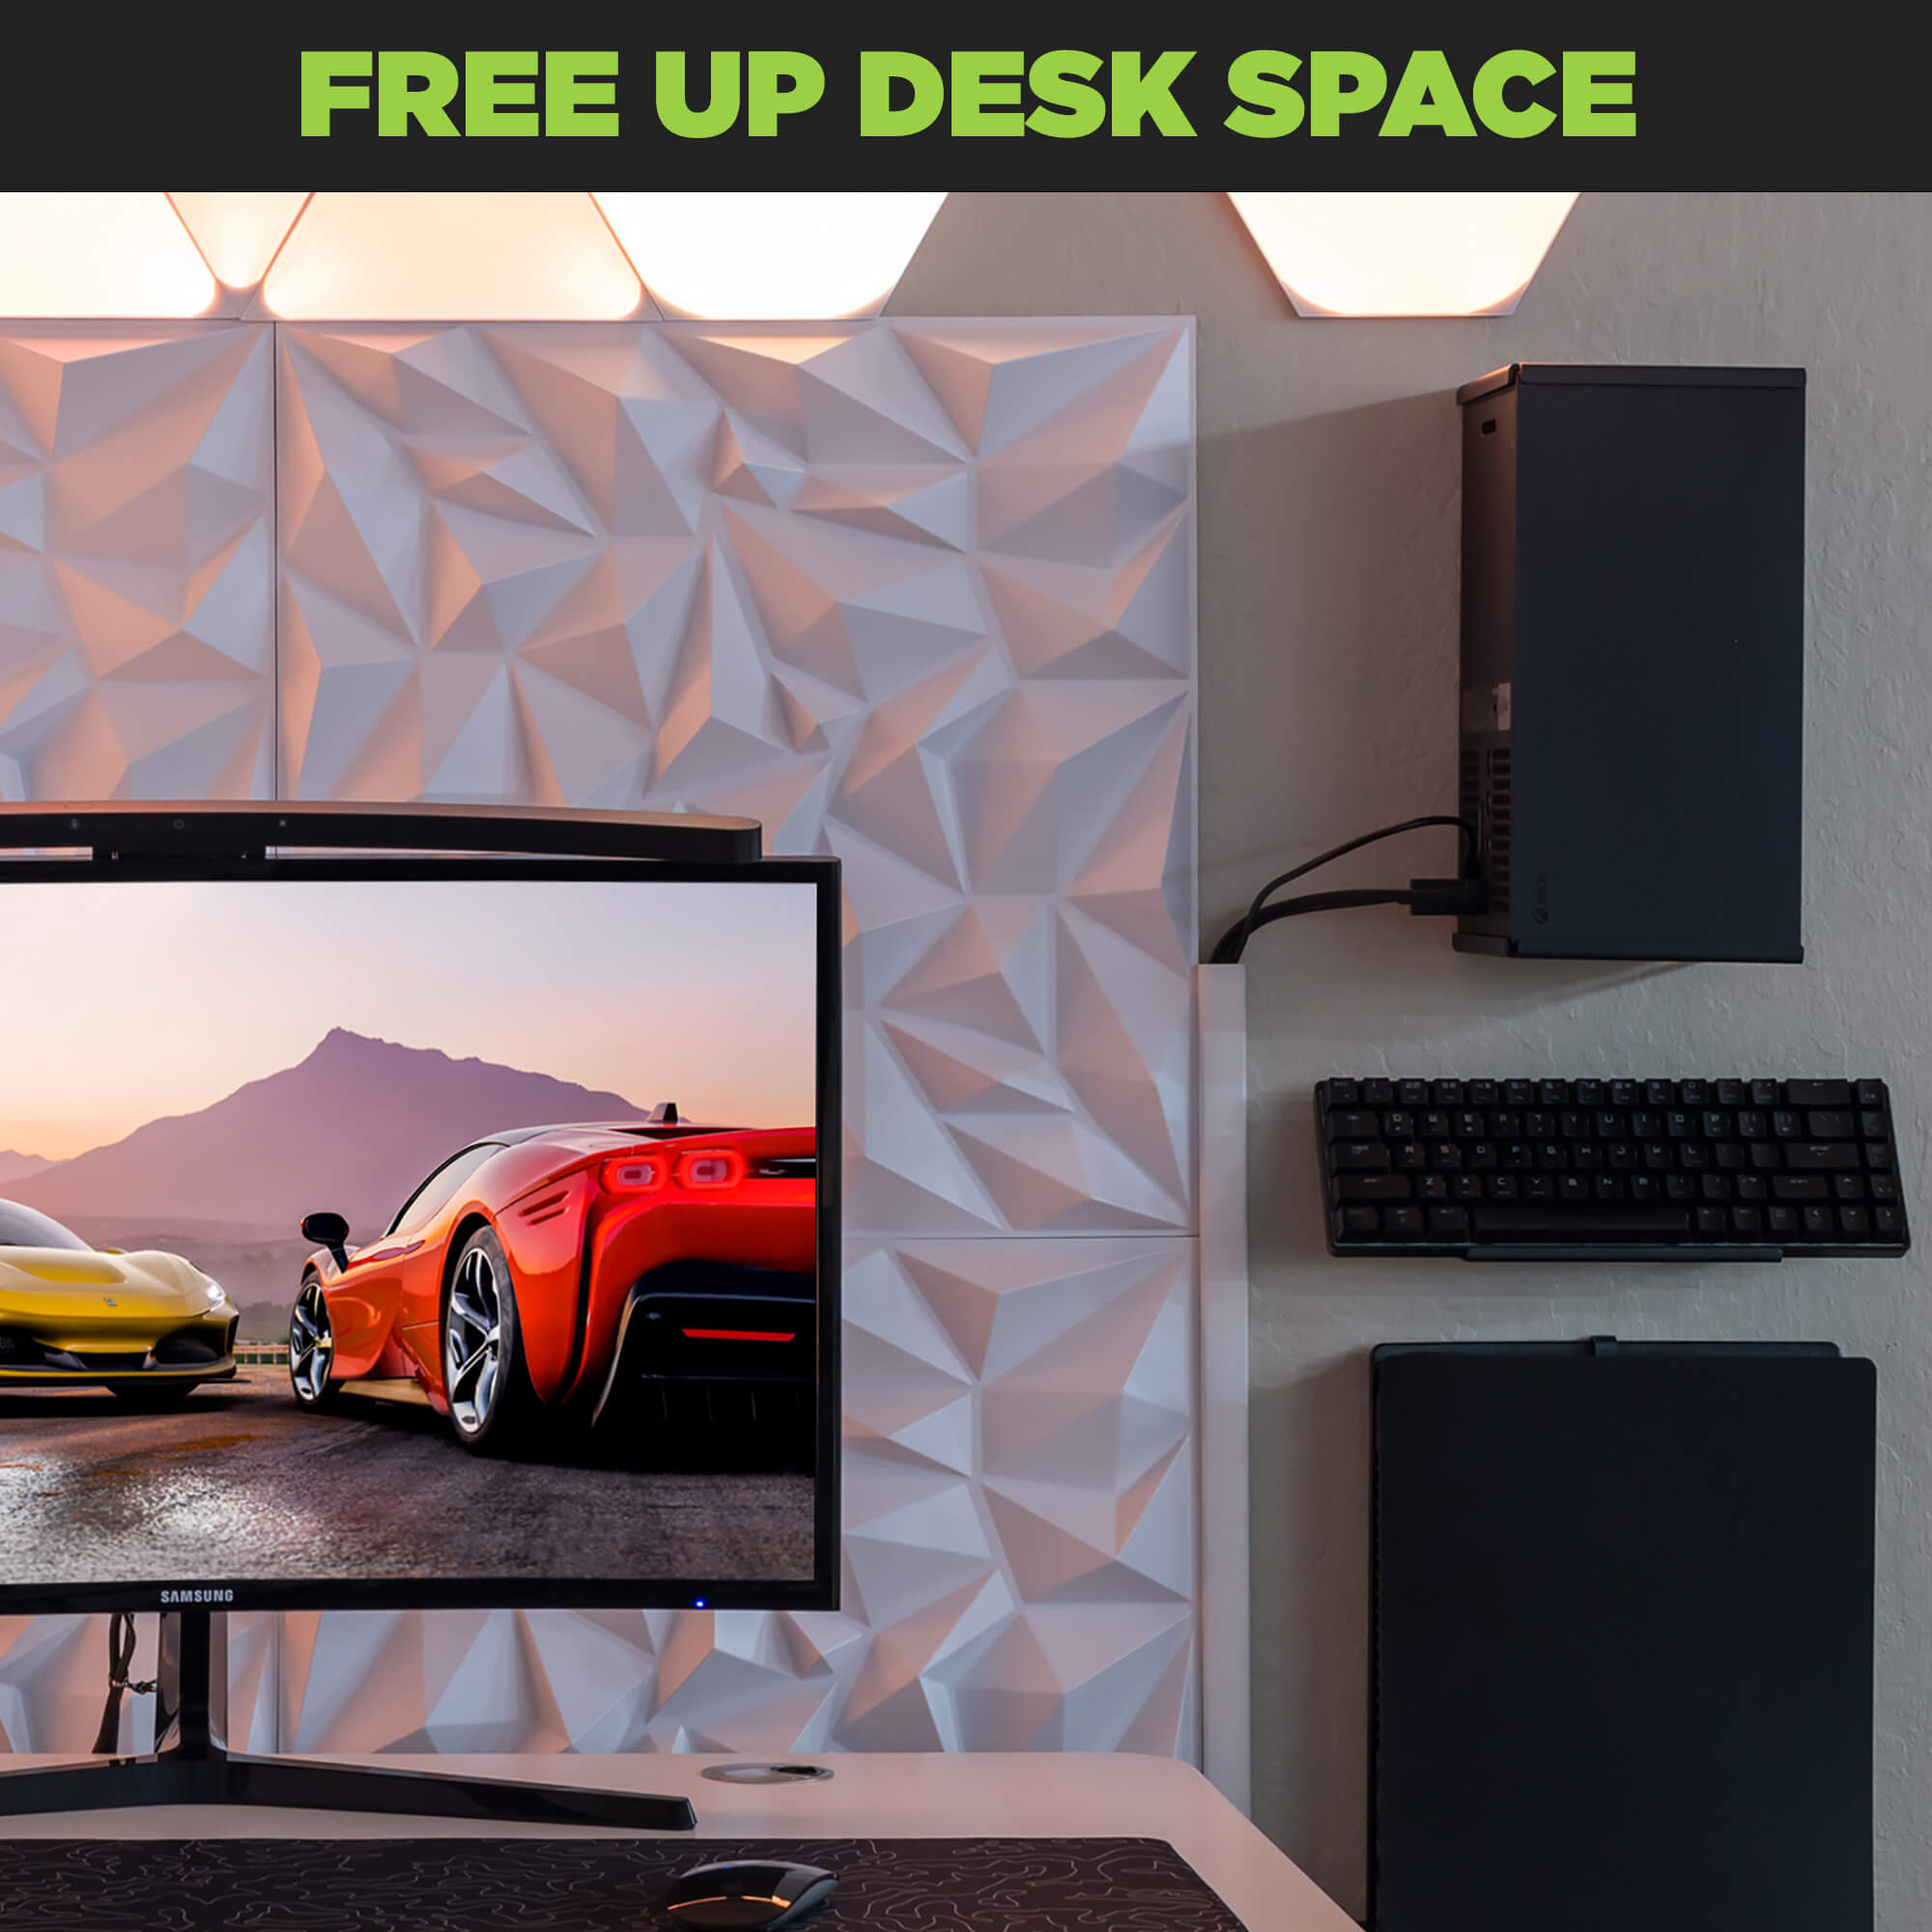 Free up desk space with the HIDEit Key Mount for keyboards or handheld gaming devices.